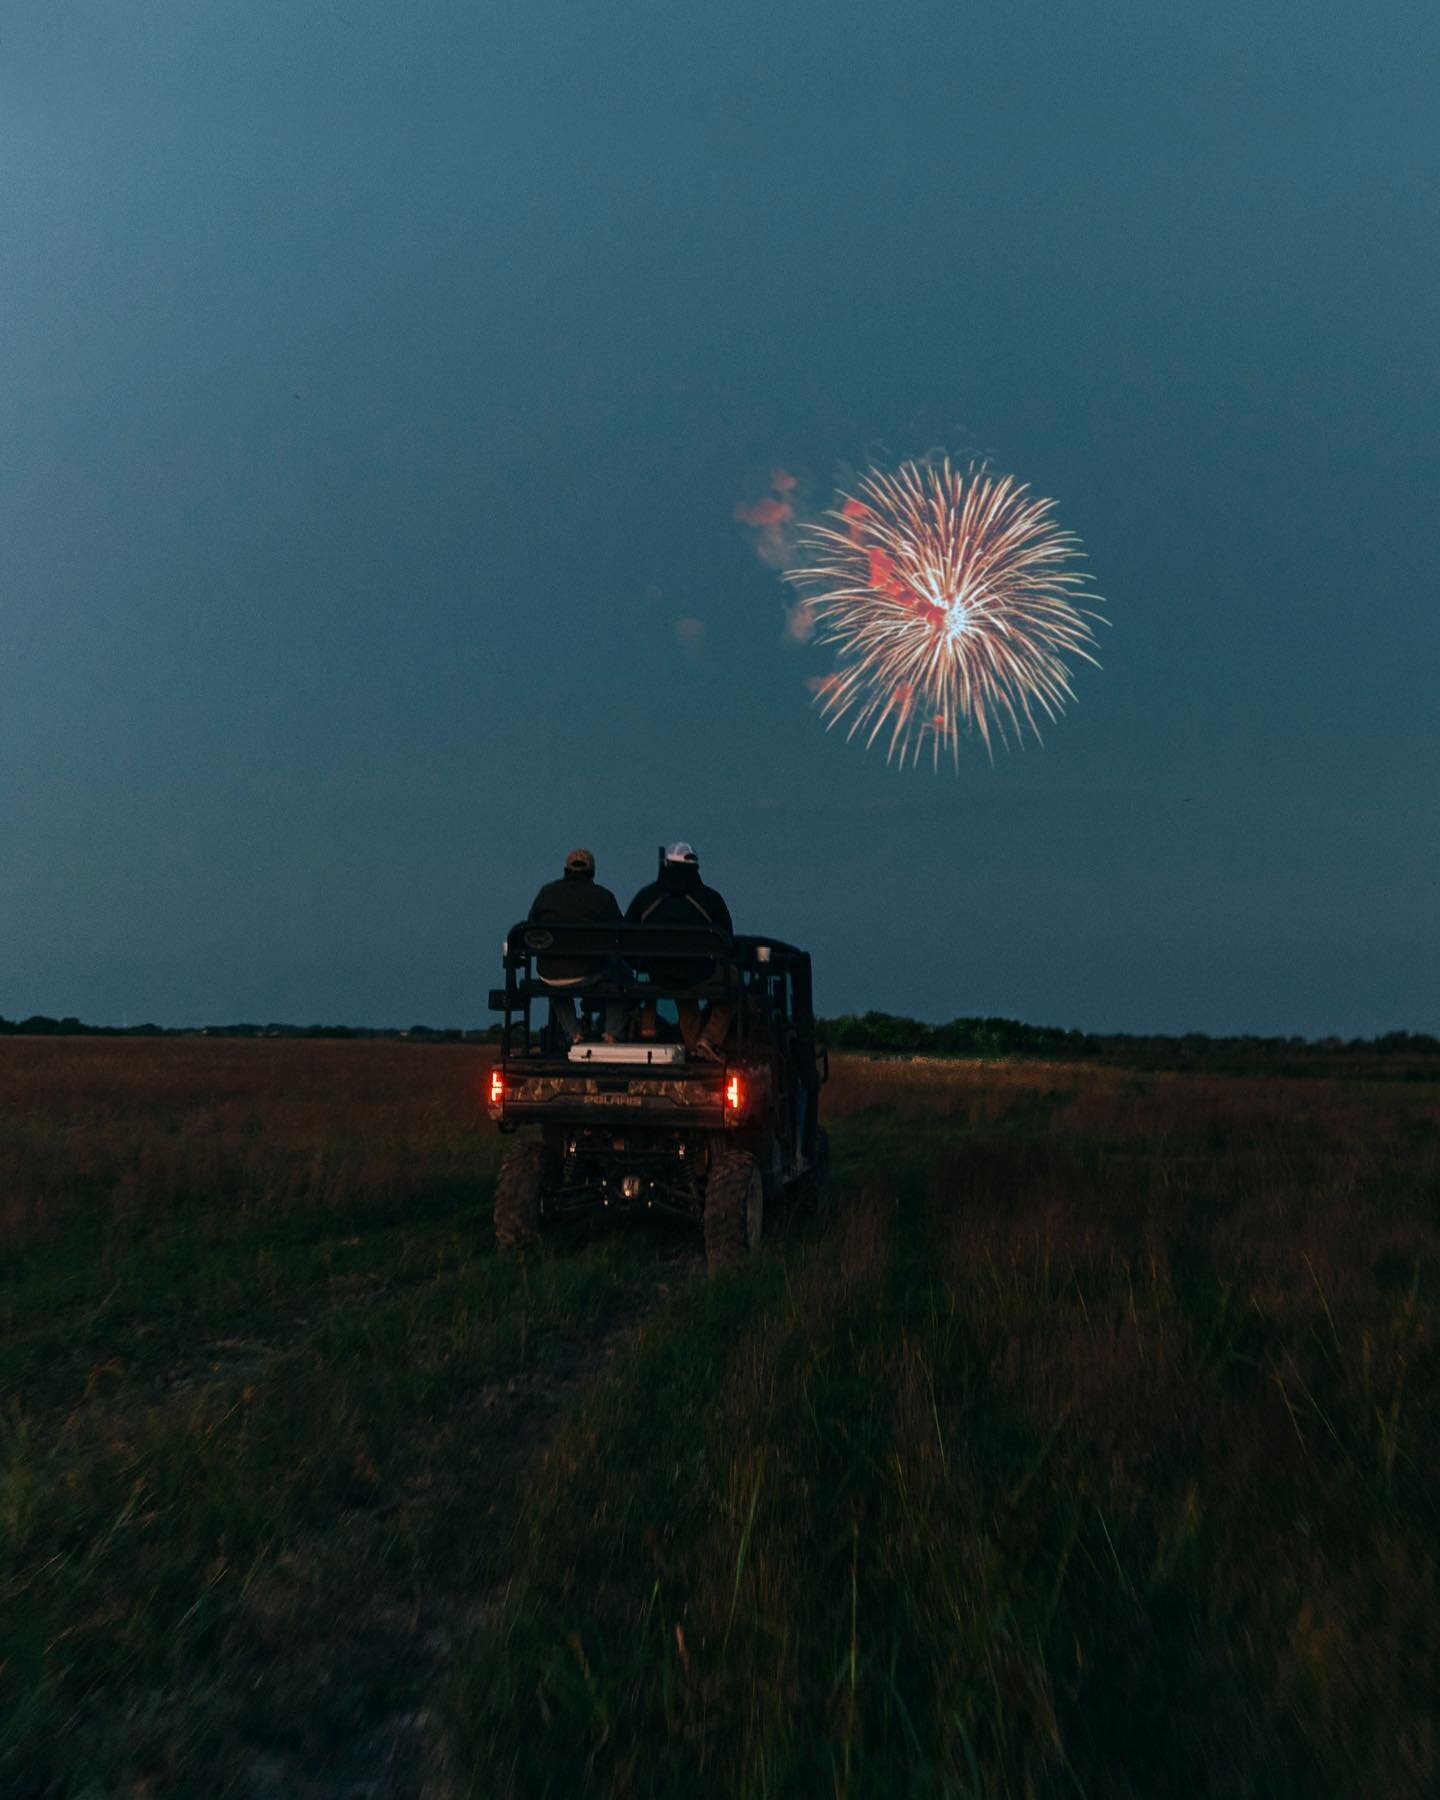 HAPPY 4TH Y&rsquo;ALL! 🇺🇸
Hope everyone had fun and safe holiday.

📸 @baileyhartcreative 
#ranchwateroutdoors #ranchwaterrentals